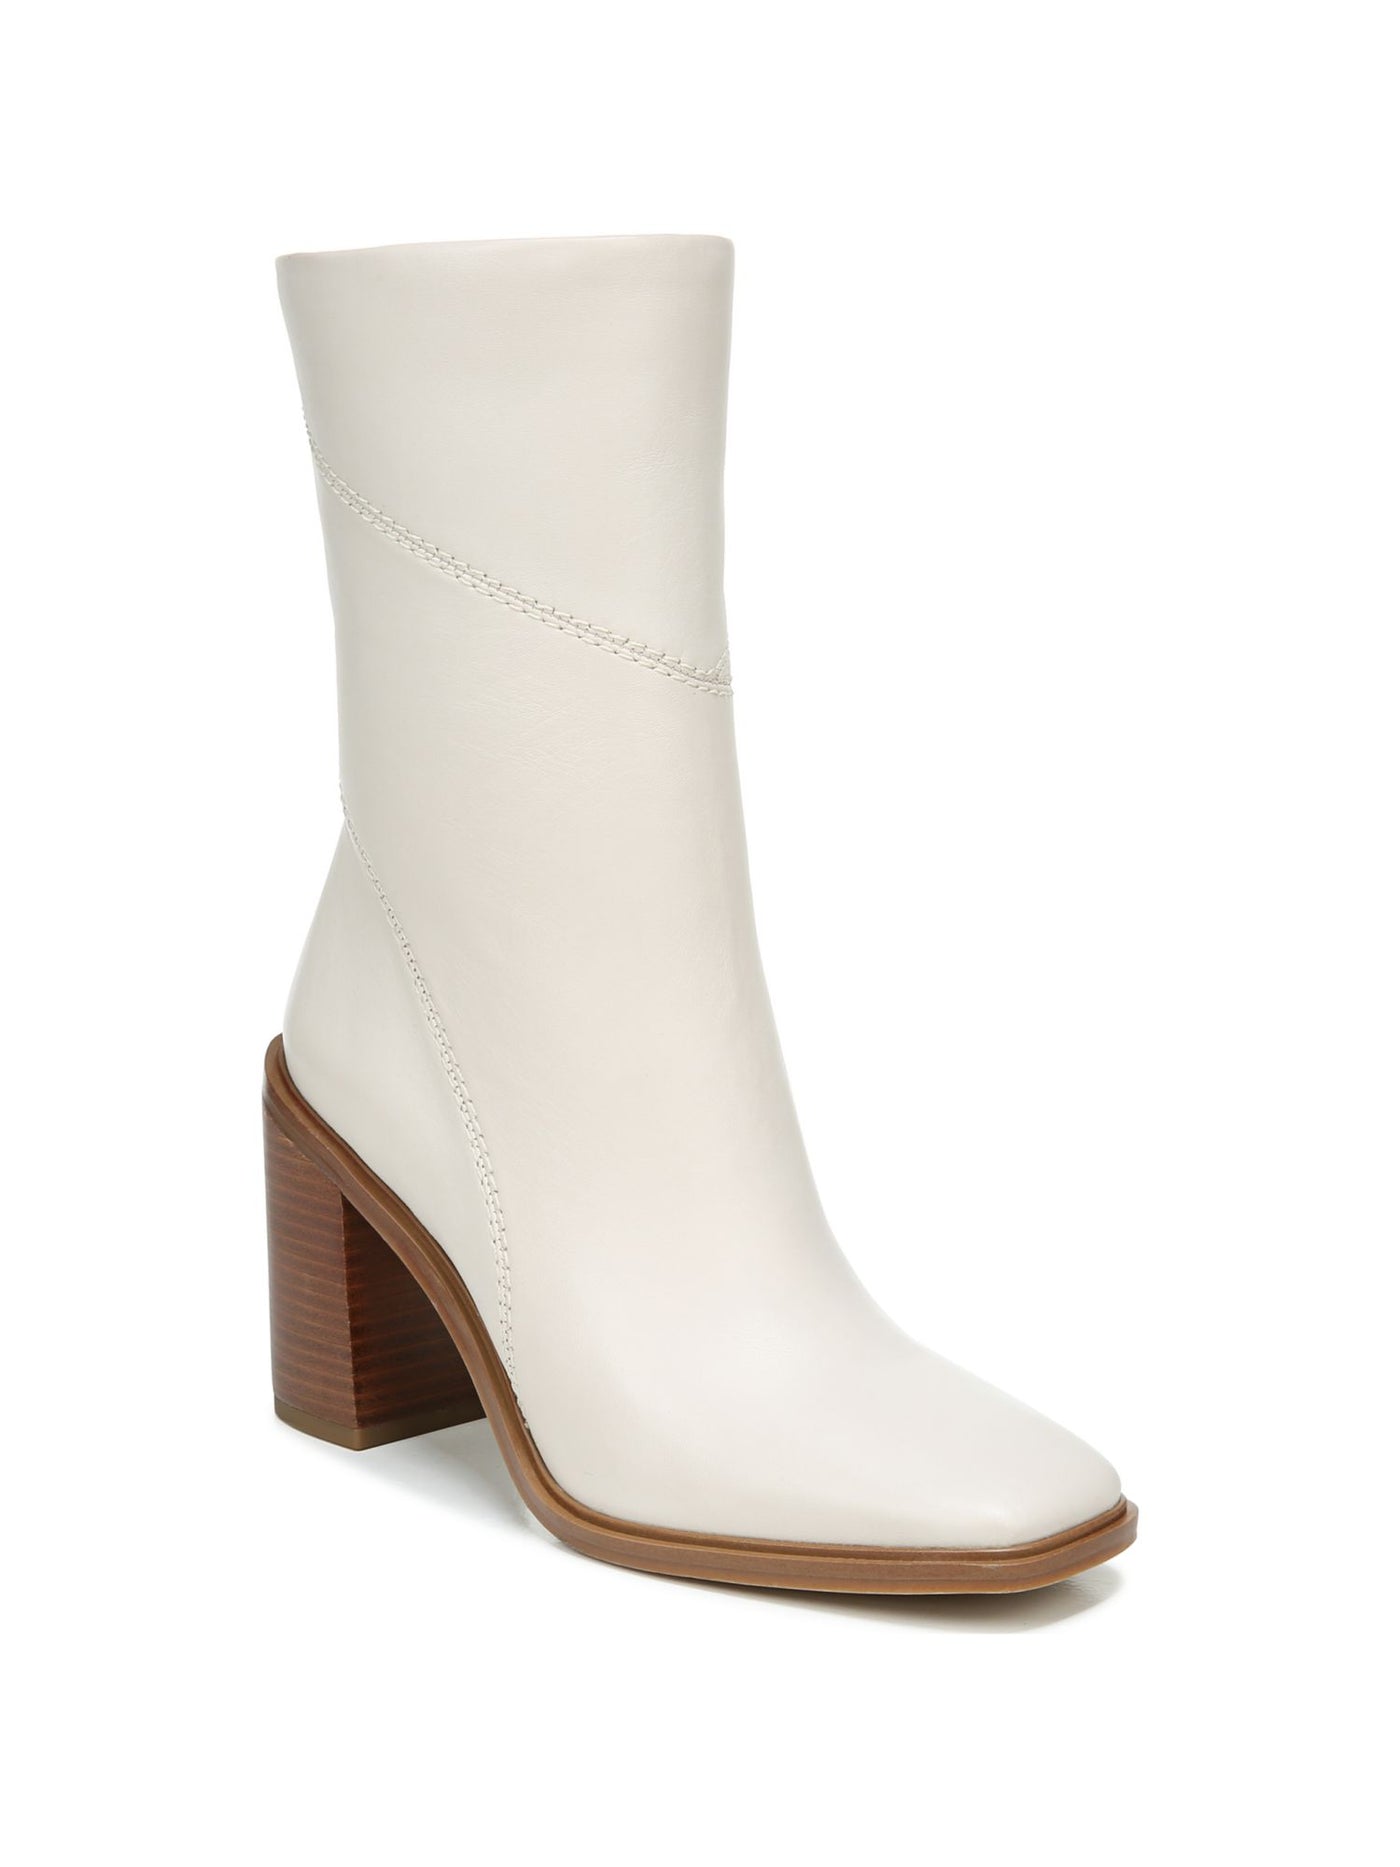 FRANCO SARTO Womens Ivory Cushioned Stevie Square Toe Block Heel Zip-Up Leather Dress Boots 10 M